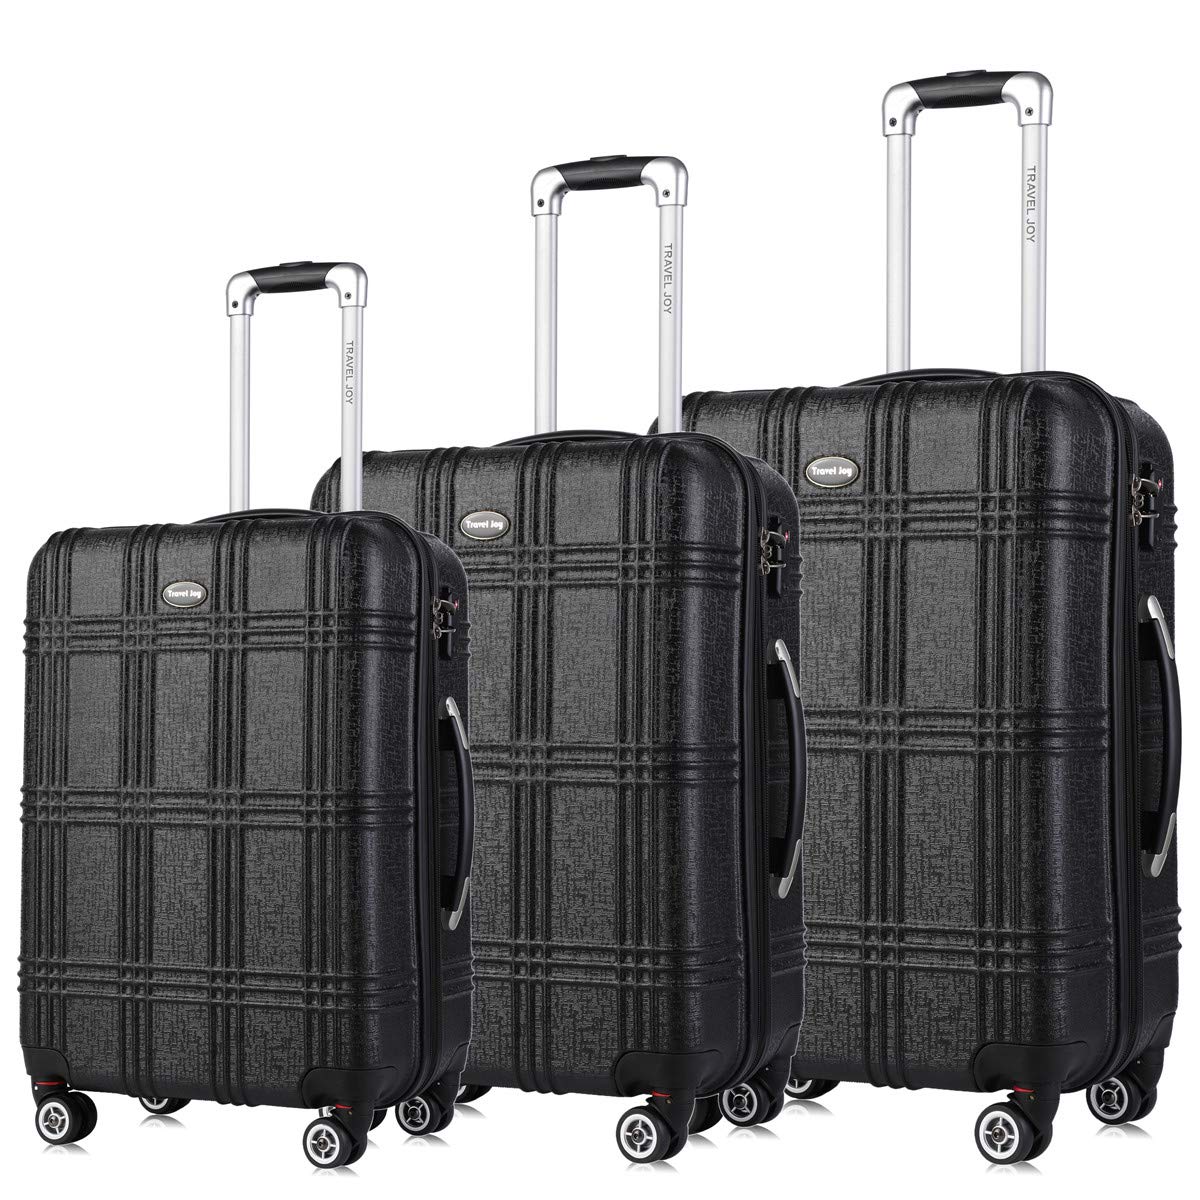 Best Luggage Sets For Money 2020